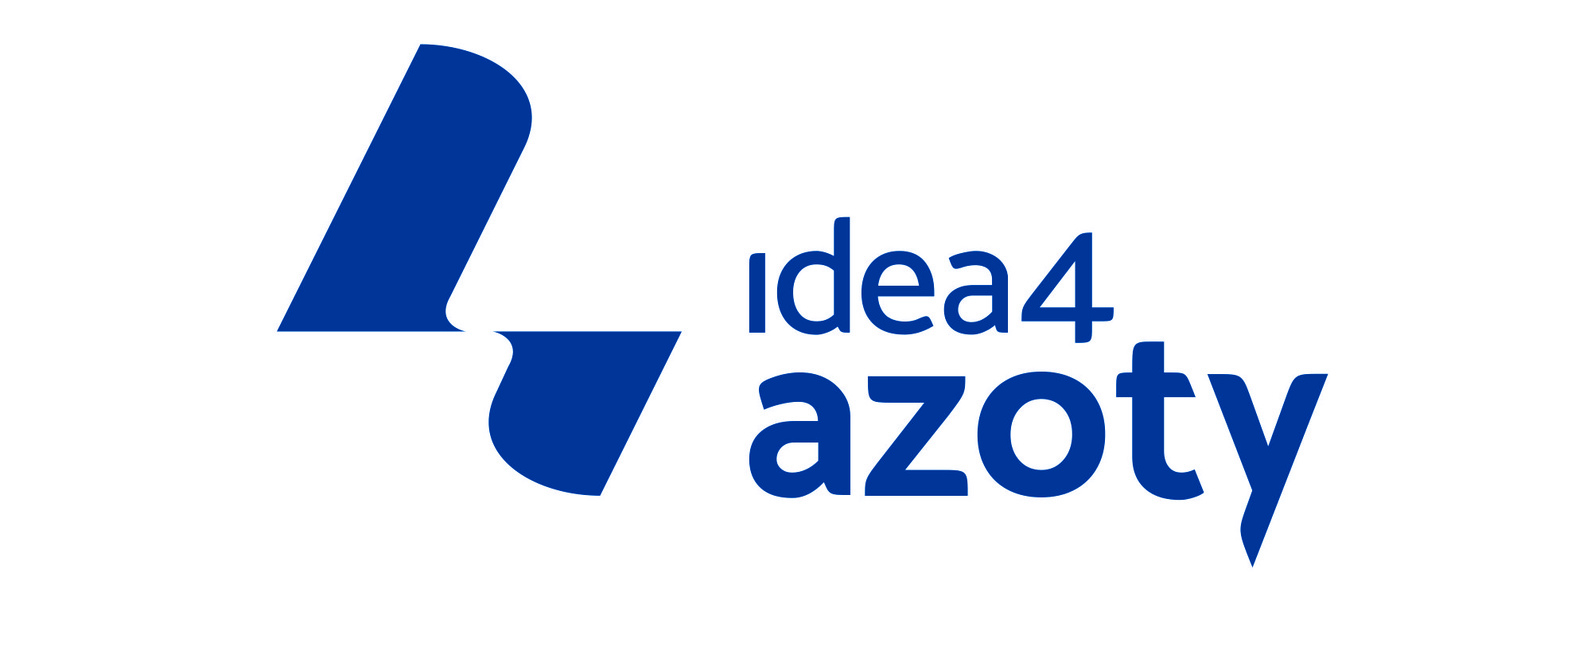 Idea4Azoty – Grupa Azoty’s innovative accelerator. A programme combining crowdsourcing, networking and startups.